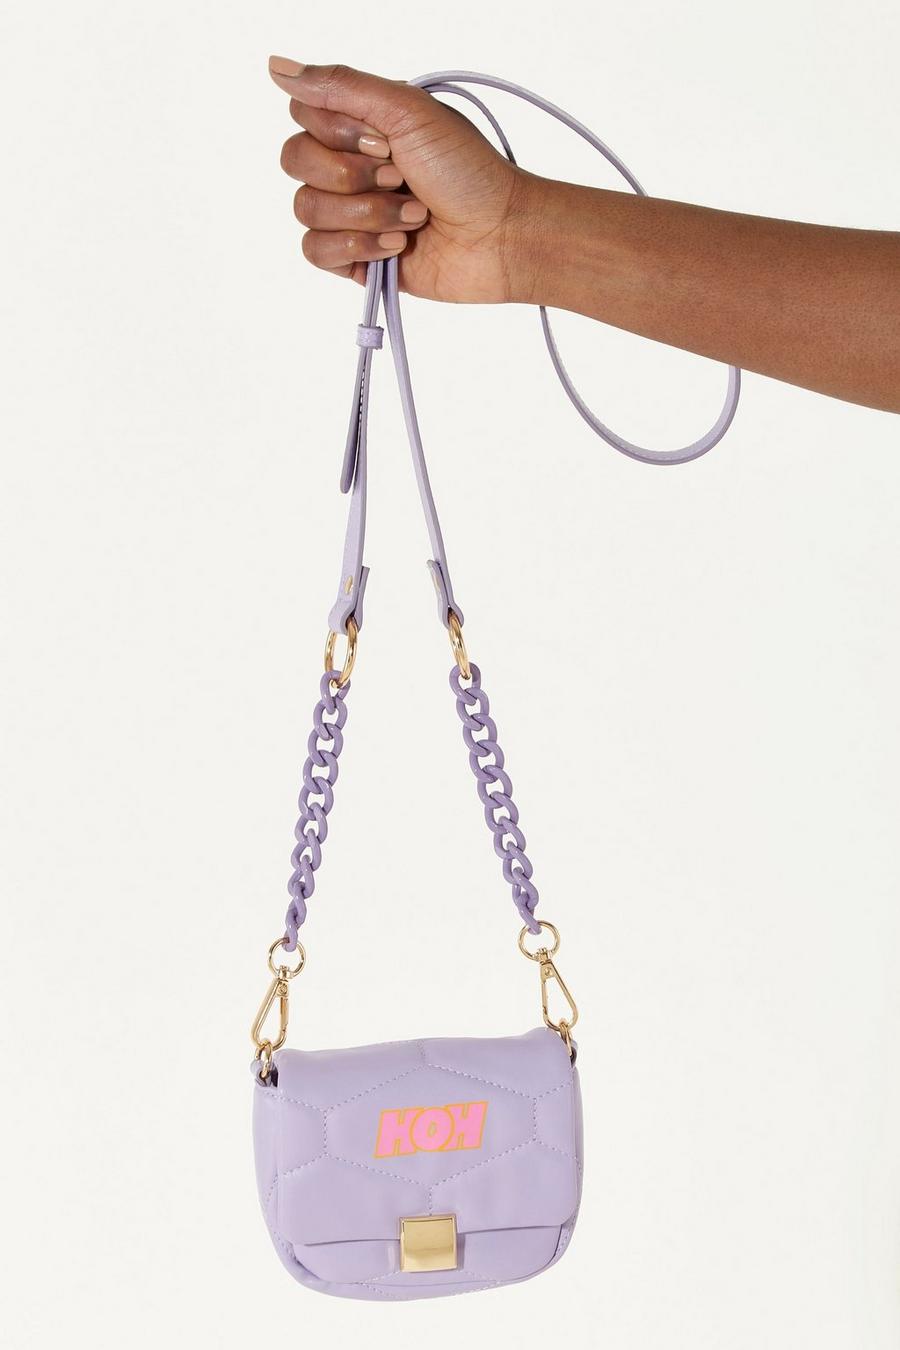 Lilac Small Cross Body Bag In Purple With A Chain Detail Strap And Printed Logo